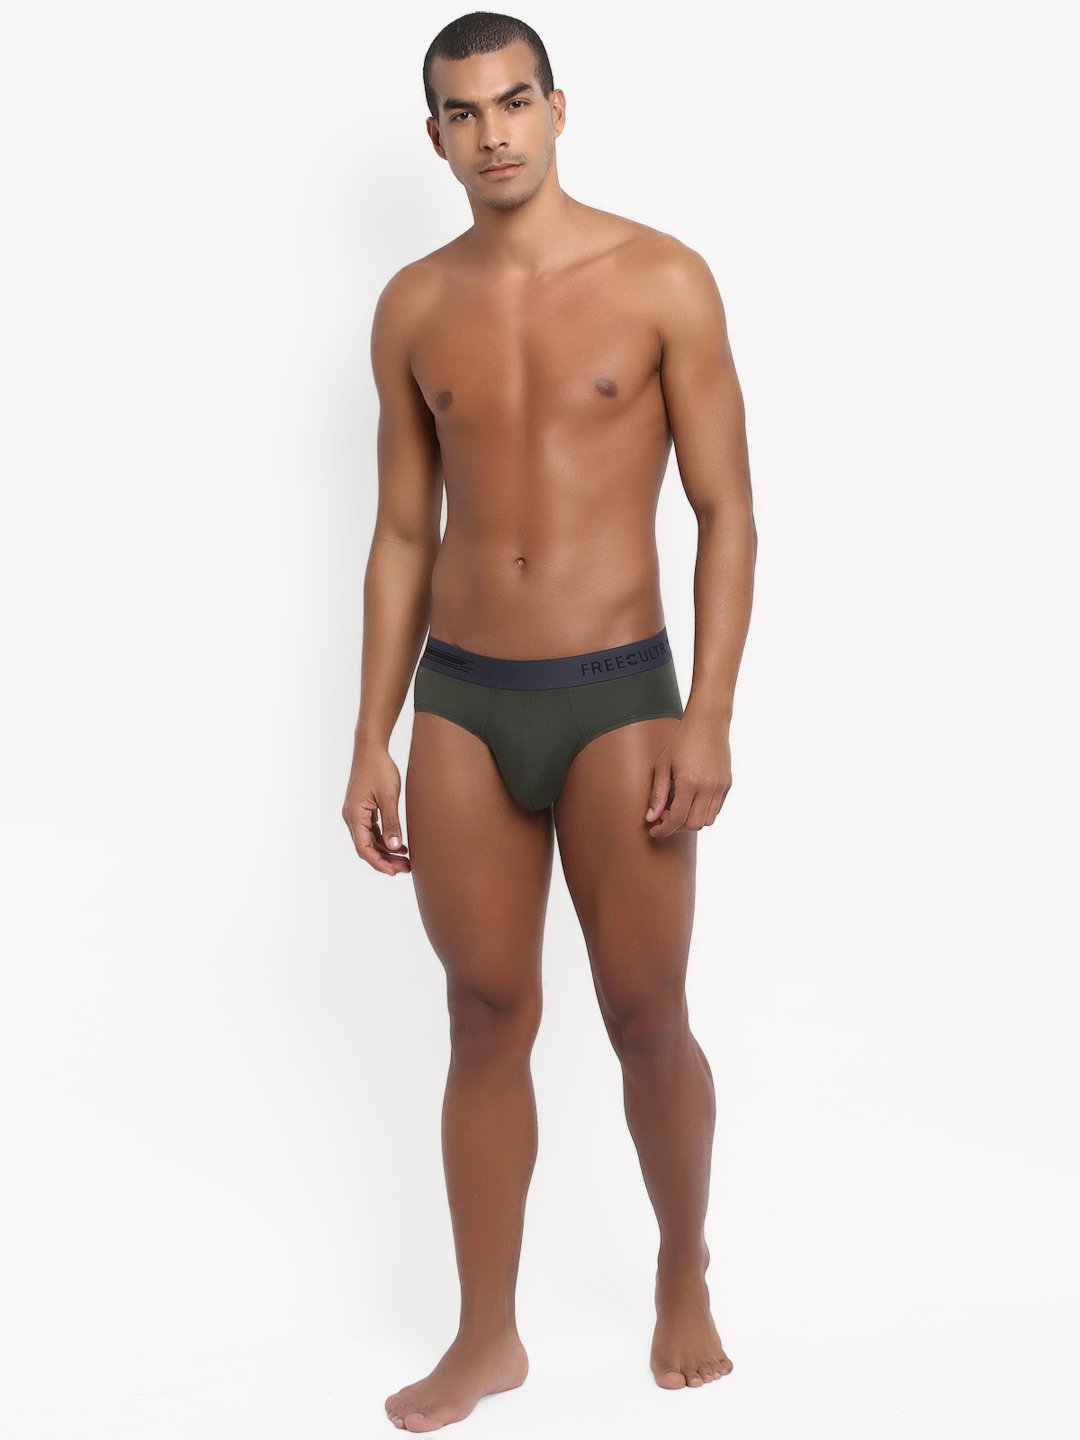 Men's Micro Modal & Elastane Brief in Contrast Waistband (Pack of 2) - freecultr.com